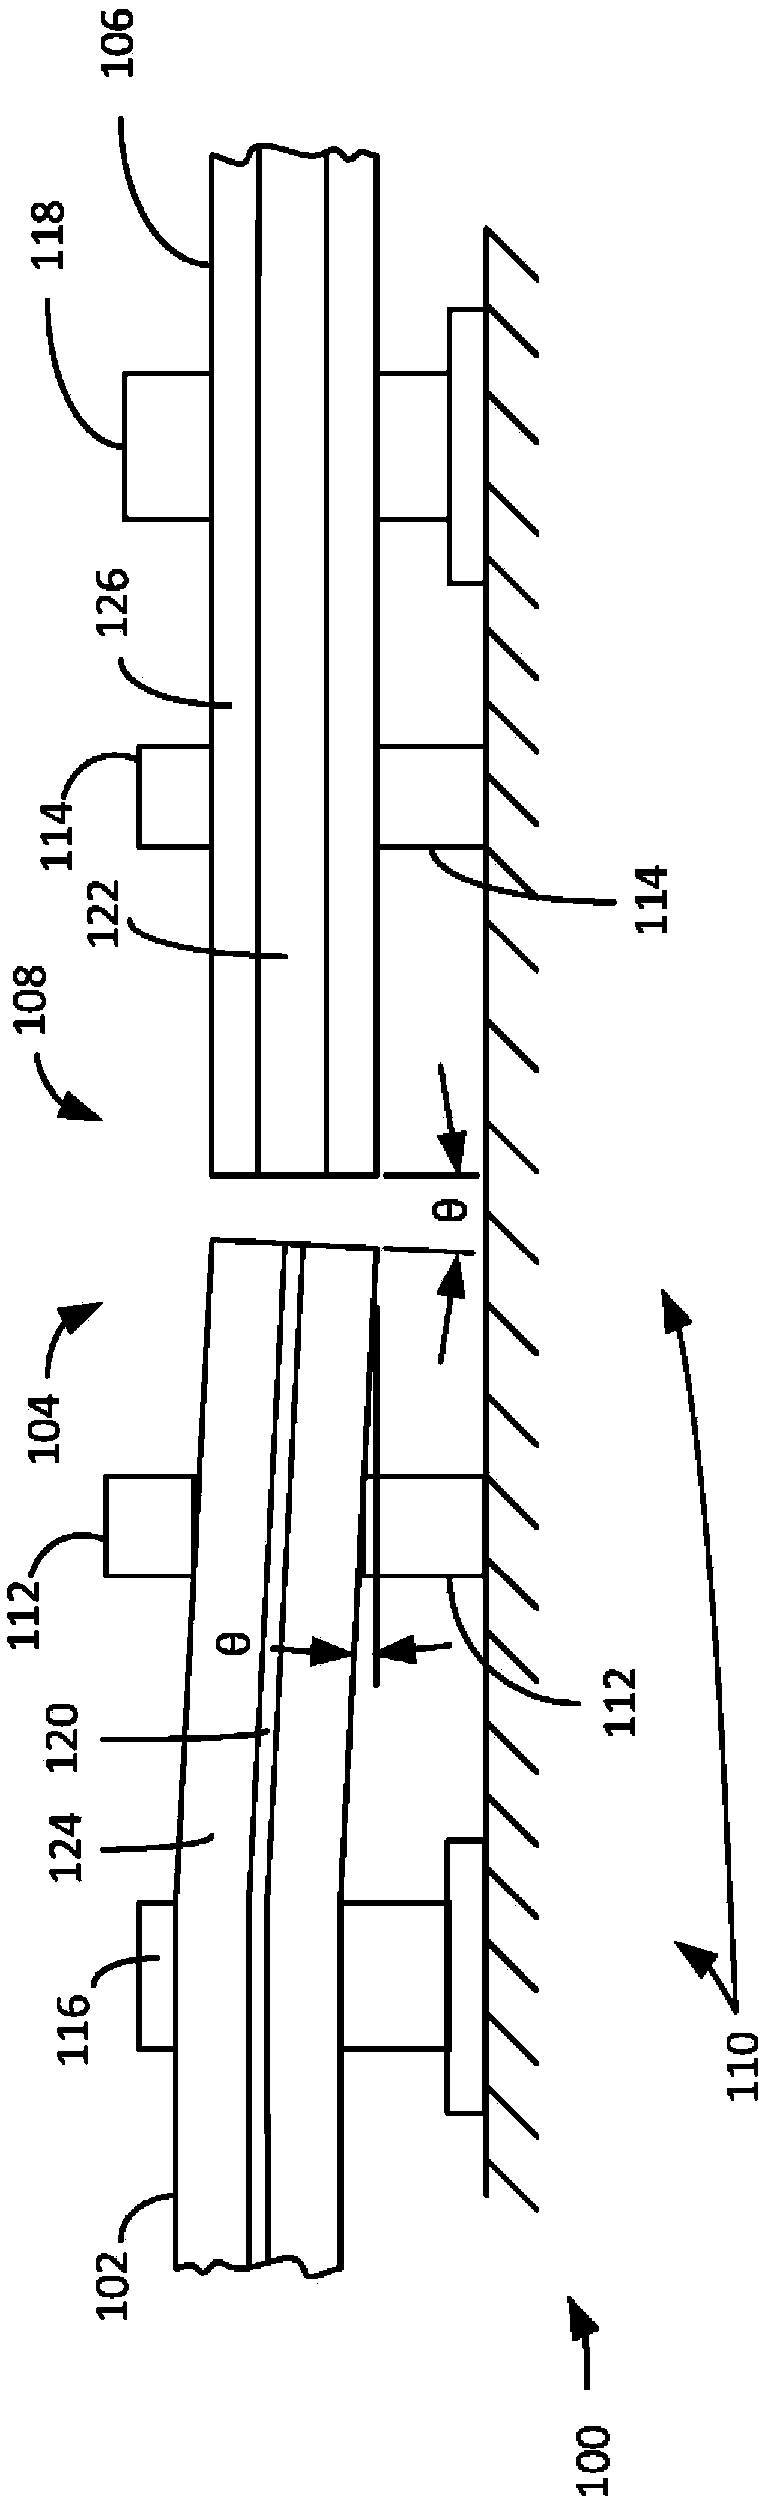 Beam parameter product (BPP) control by varying fiber-to-fiber angle